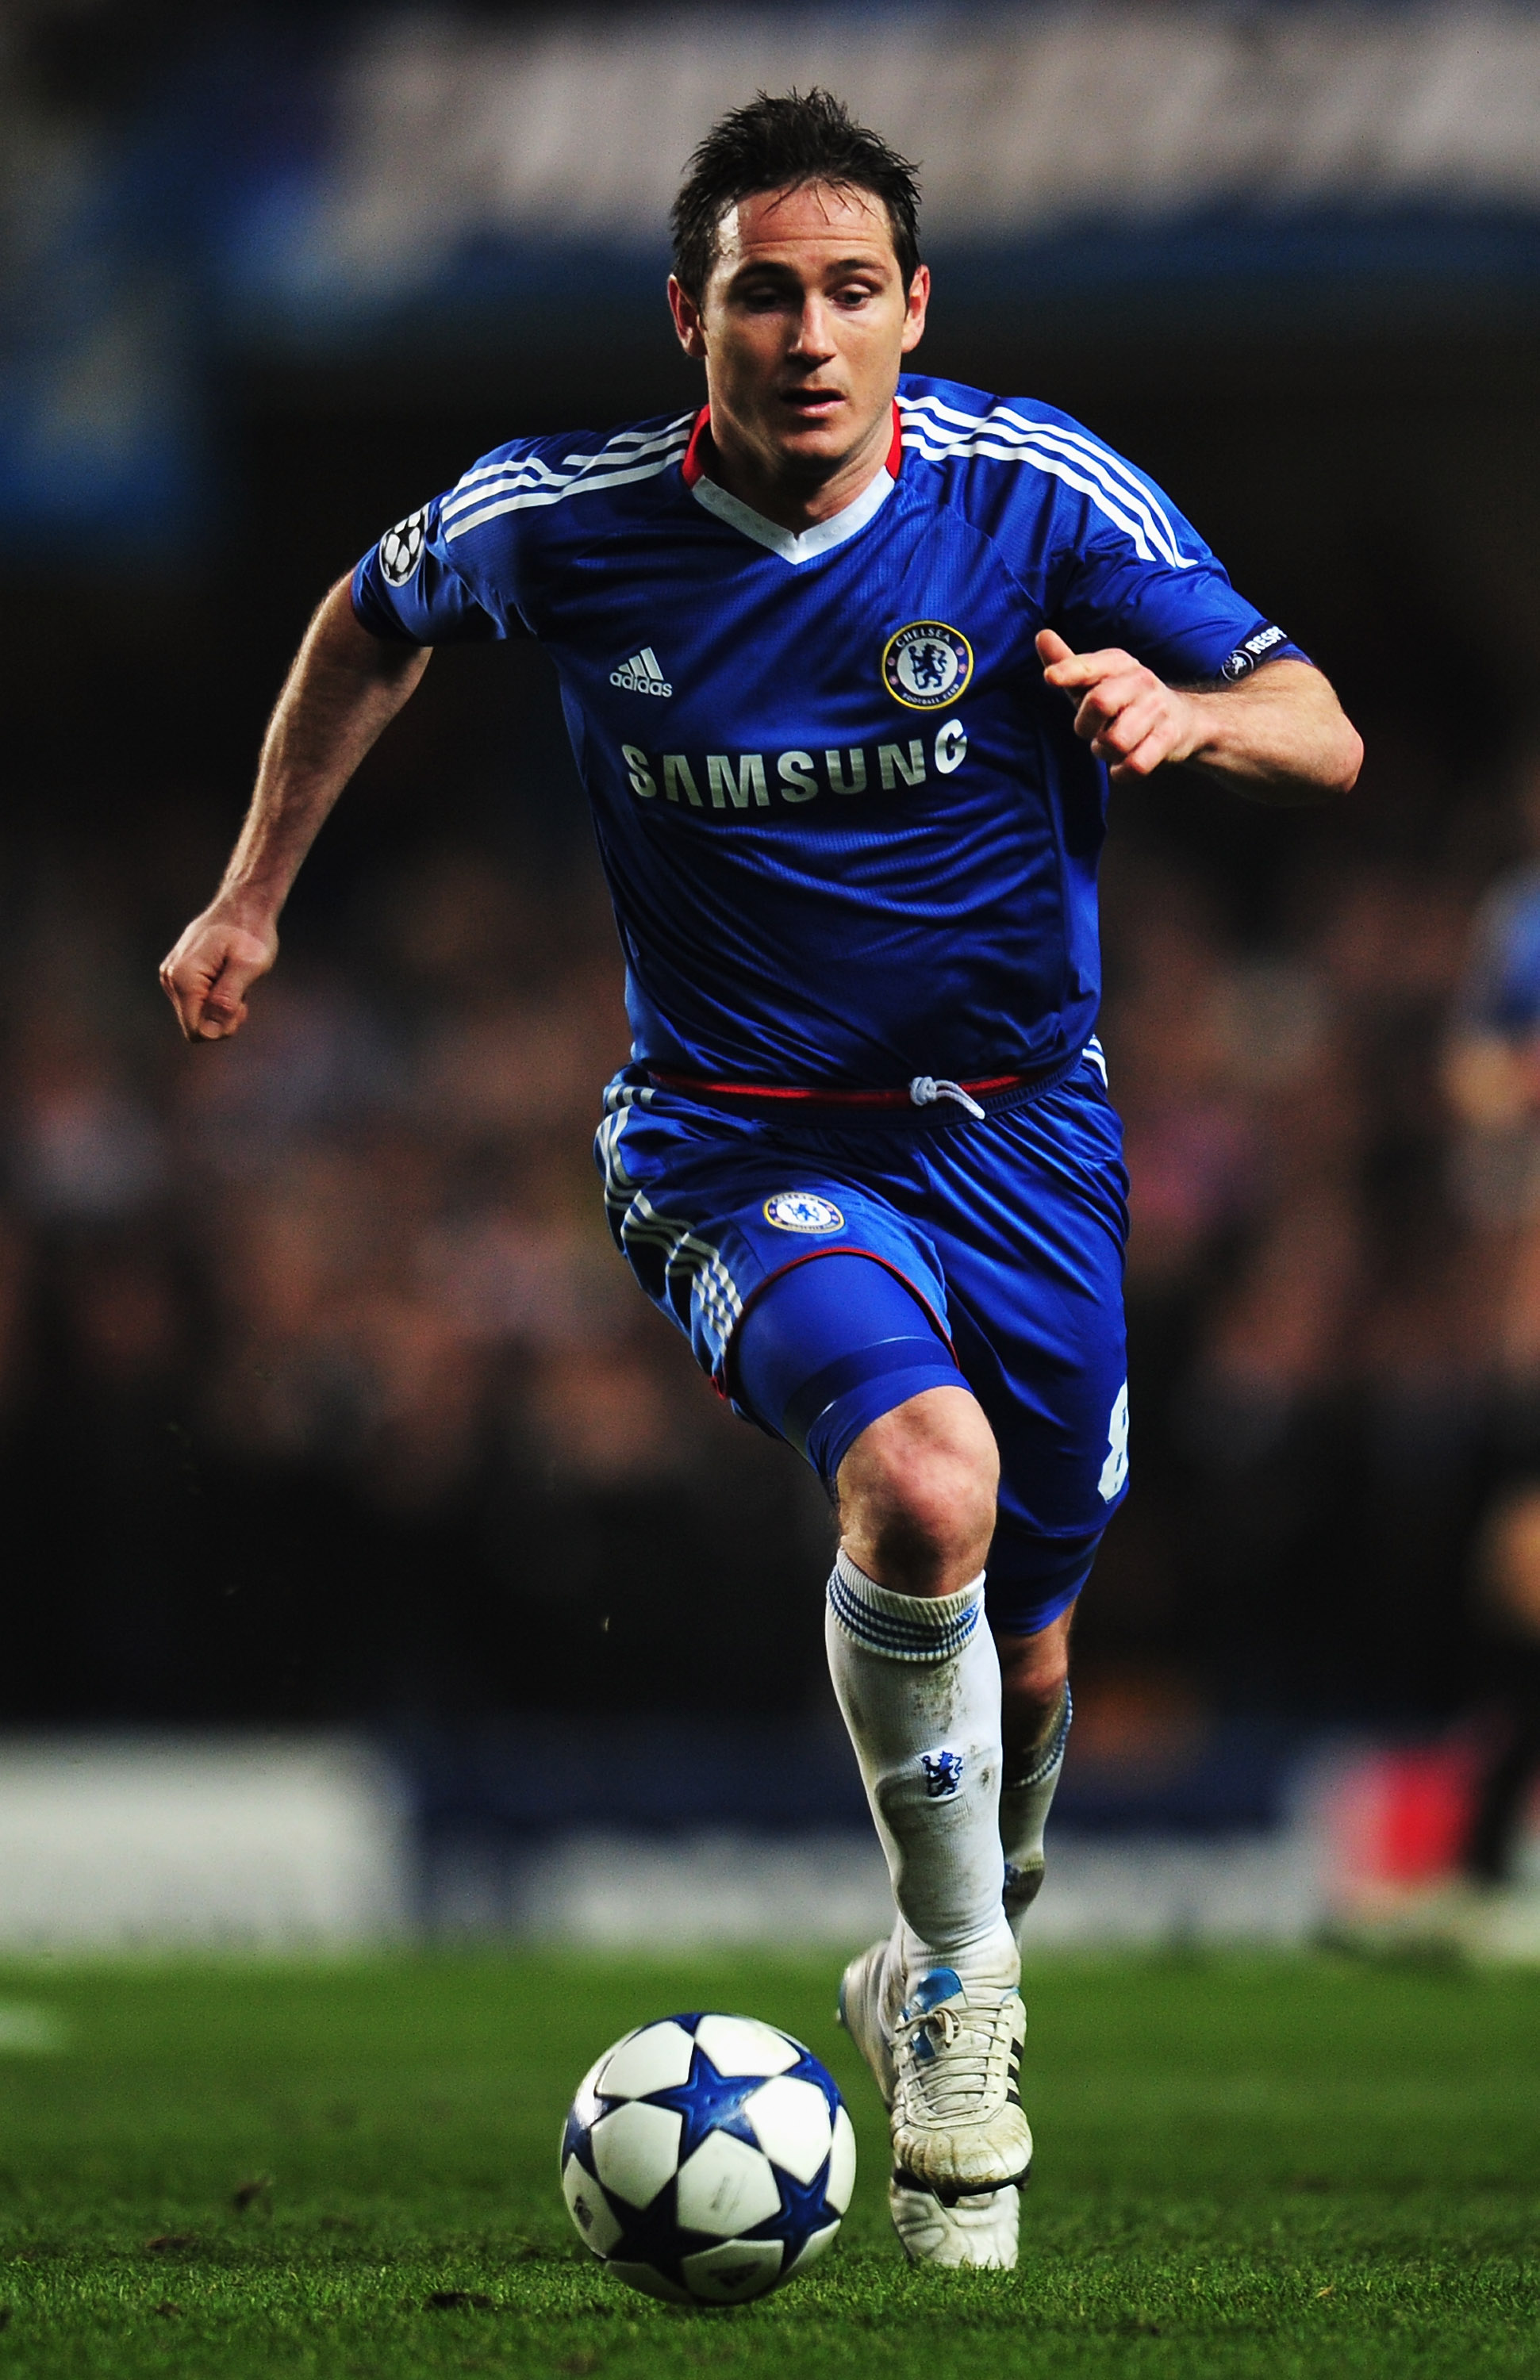 LONDON, UNITED KINGDOM - MARCH 16:  Frank Lampard of Chelsea runs with the ball during the UEFA Champions League round of sixteen second leg match between Chelsea and FC Copenhagen at Stamford Bridge on March 16, 2011 in London, England.  (Photo by Shaun 